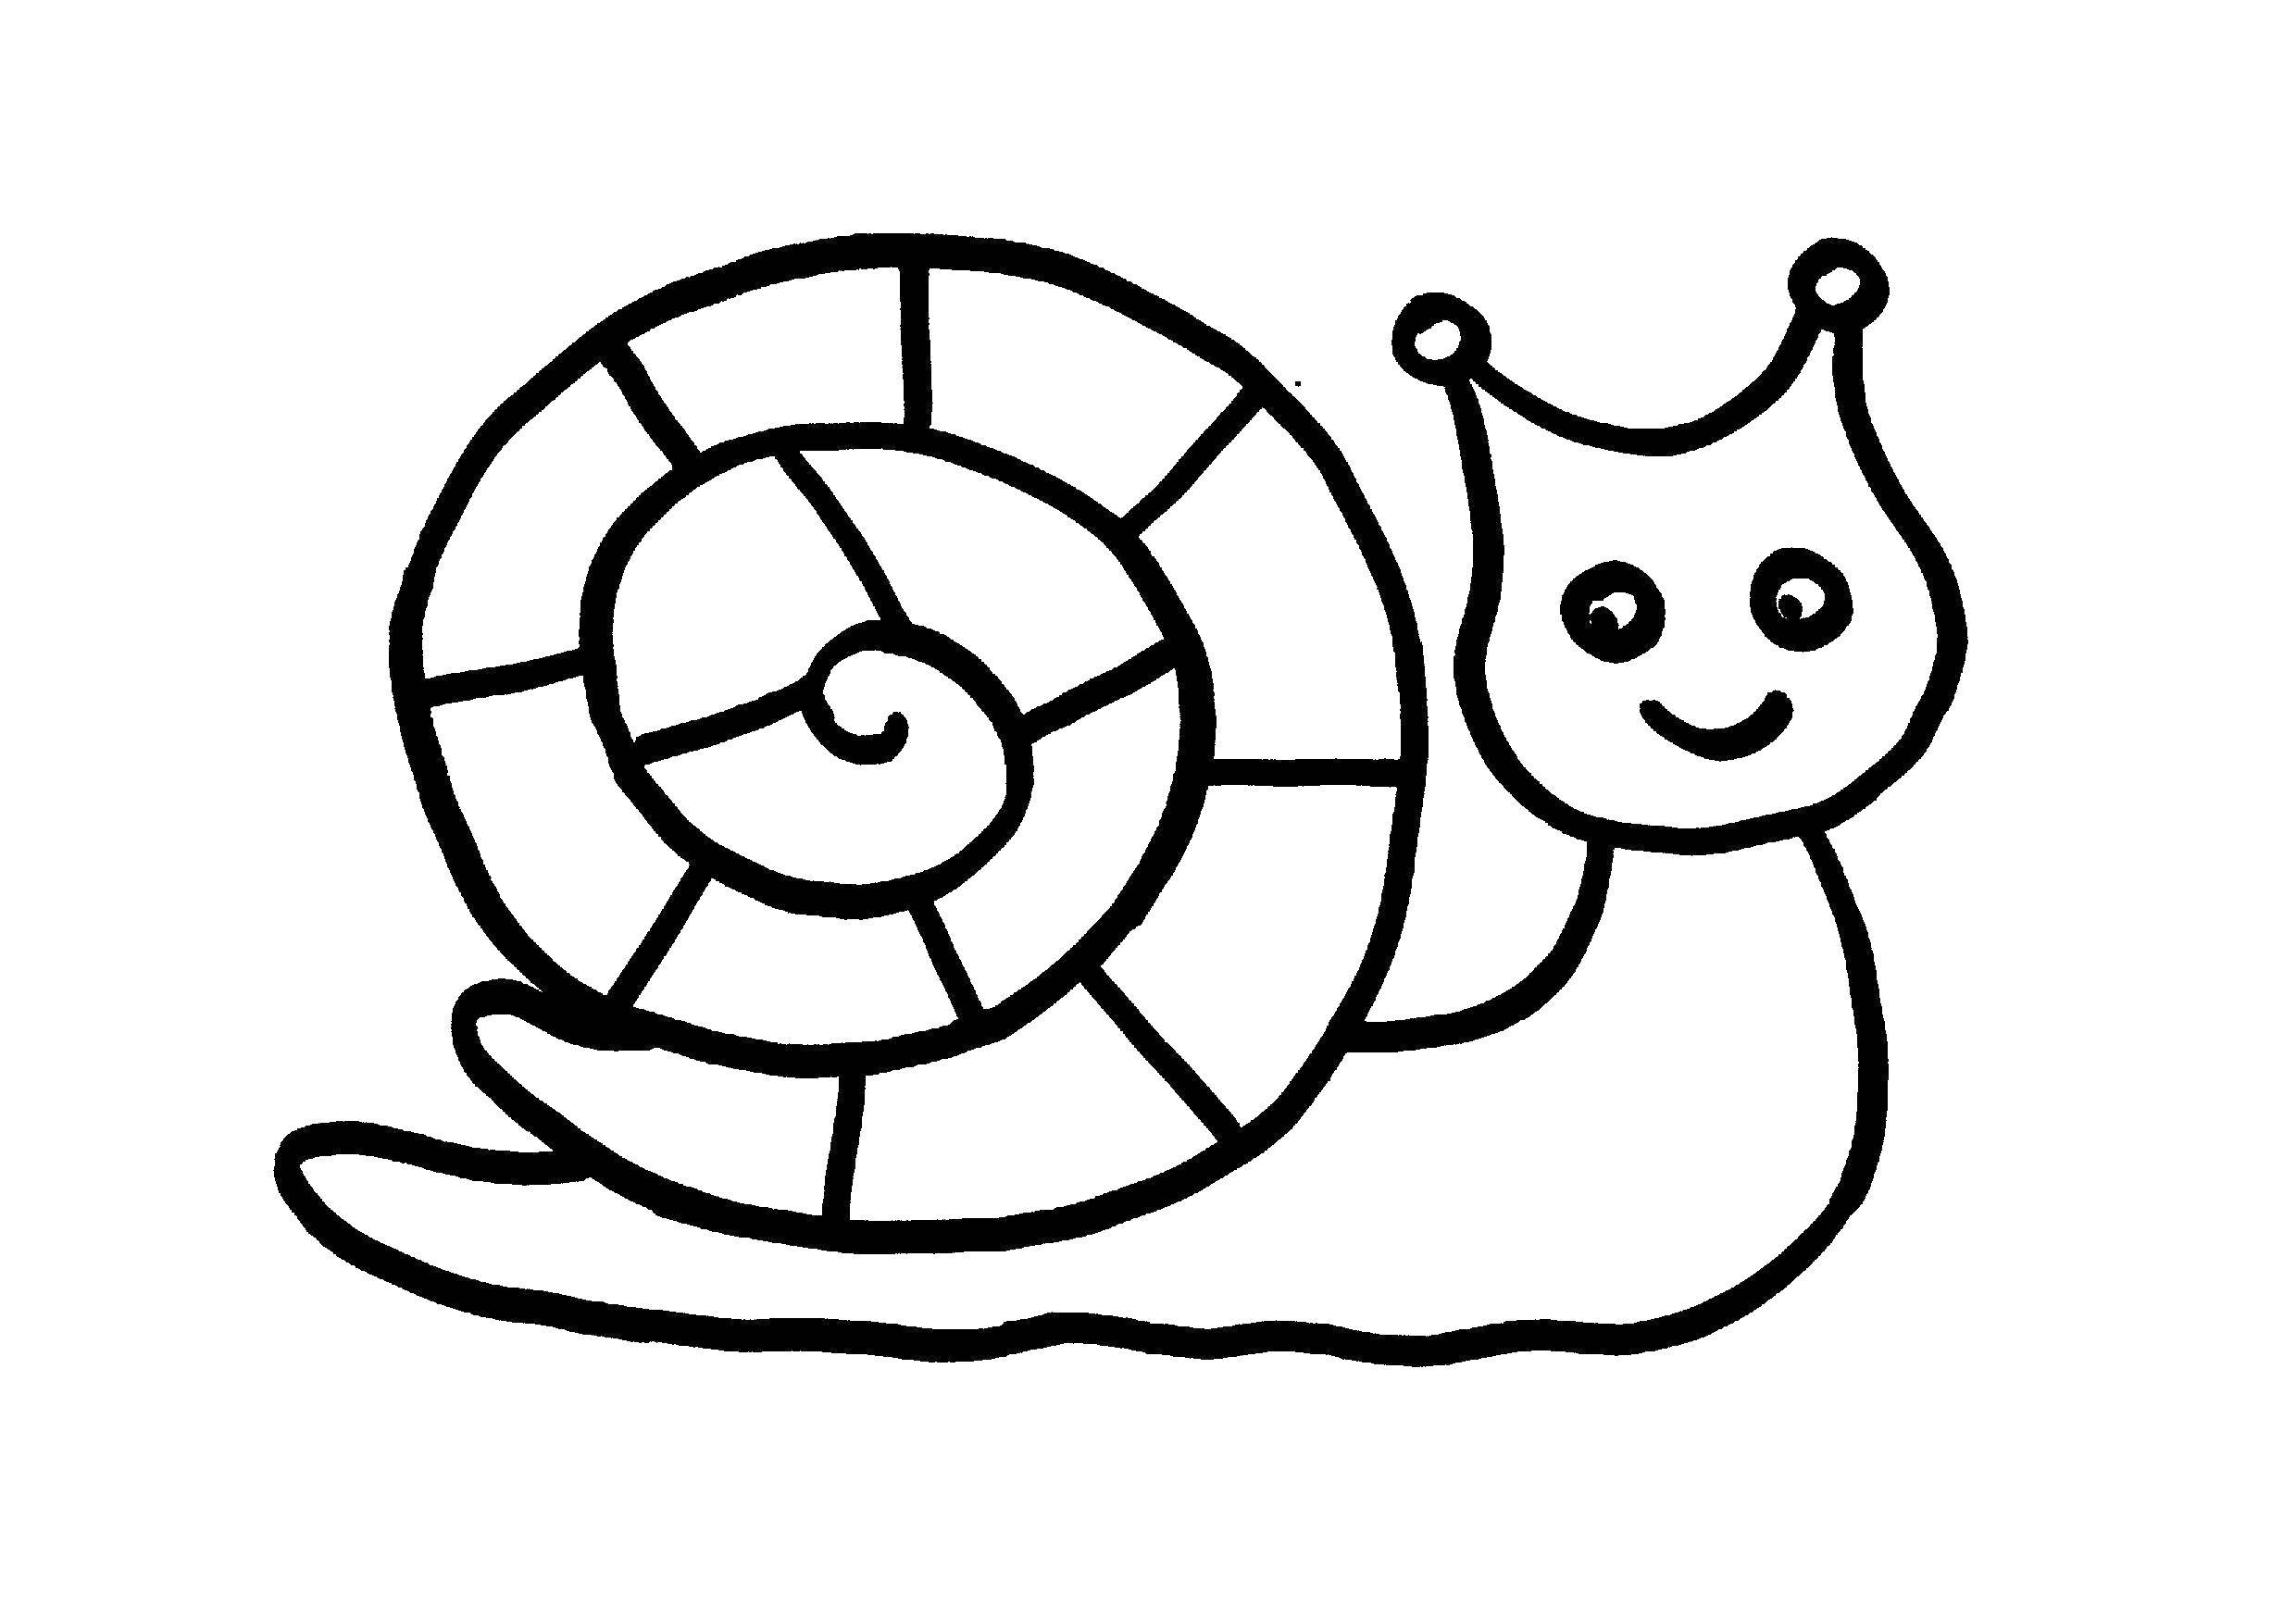 Coloring Snail. Category Coloring pages for kids. Tags:  Snail.